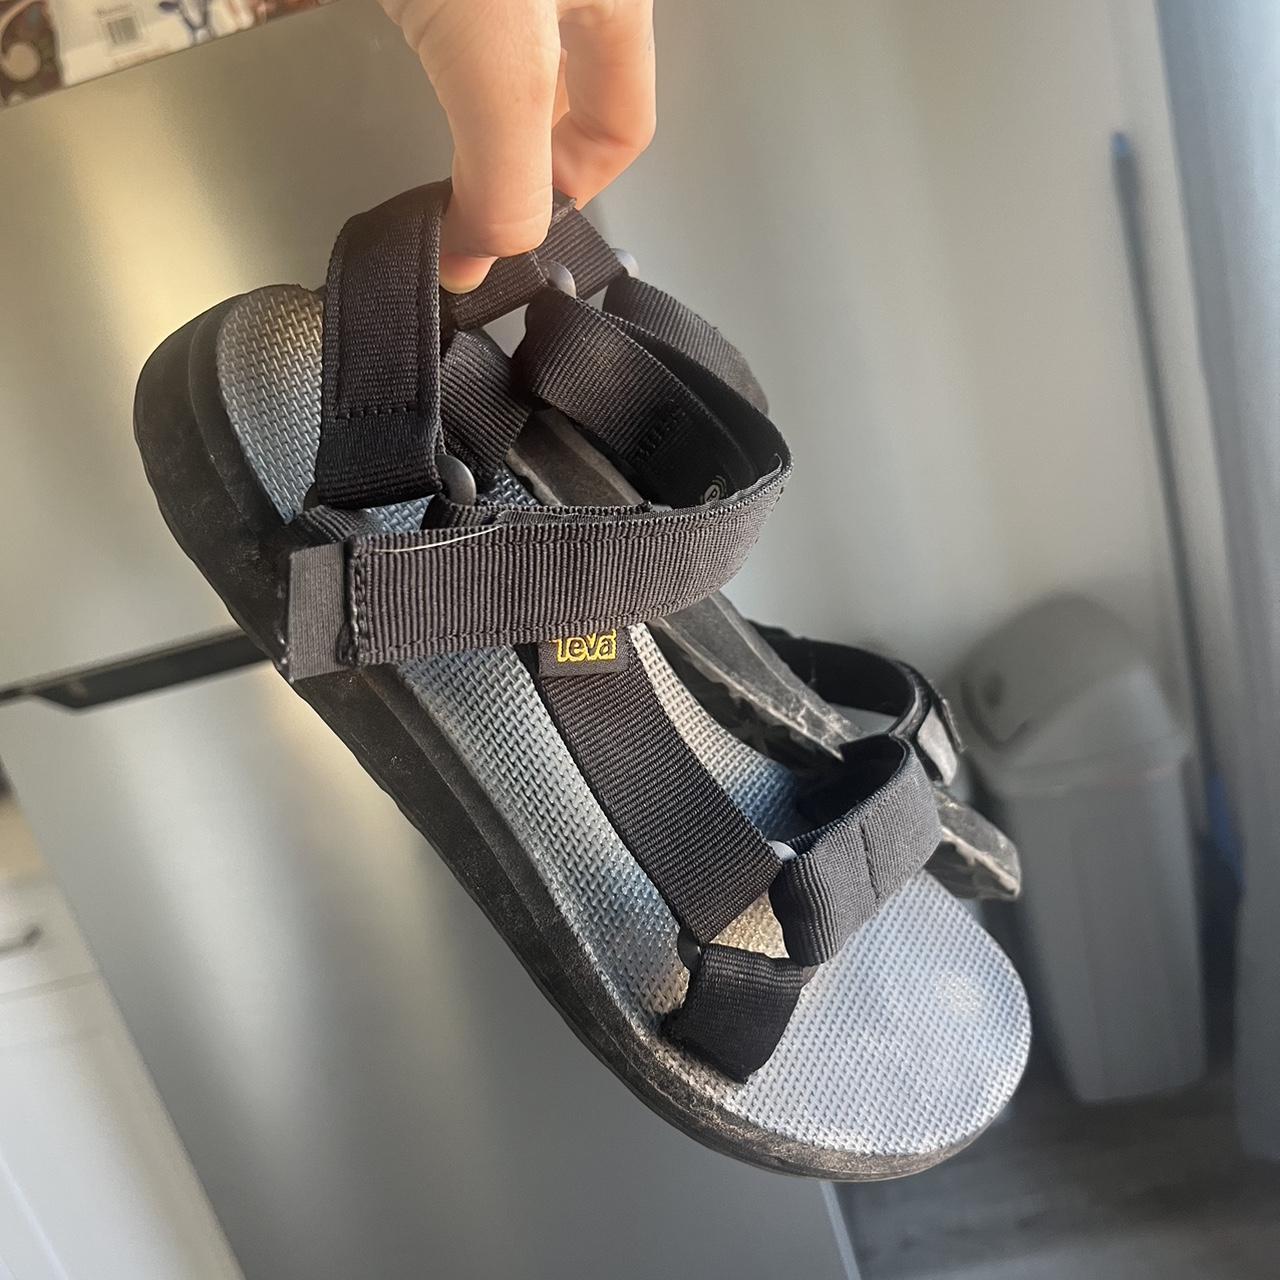 black tevas got some good use but too small for me - Depop